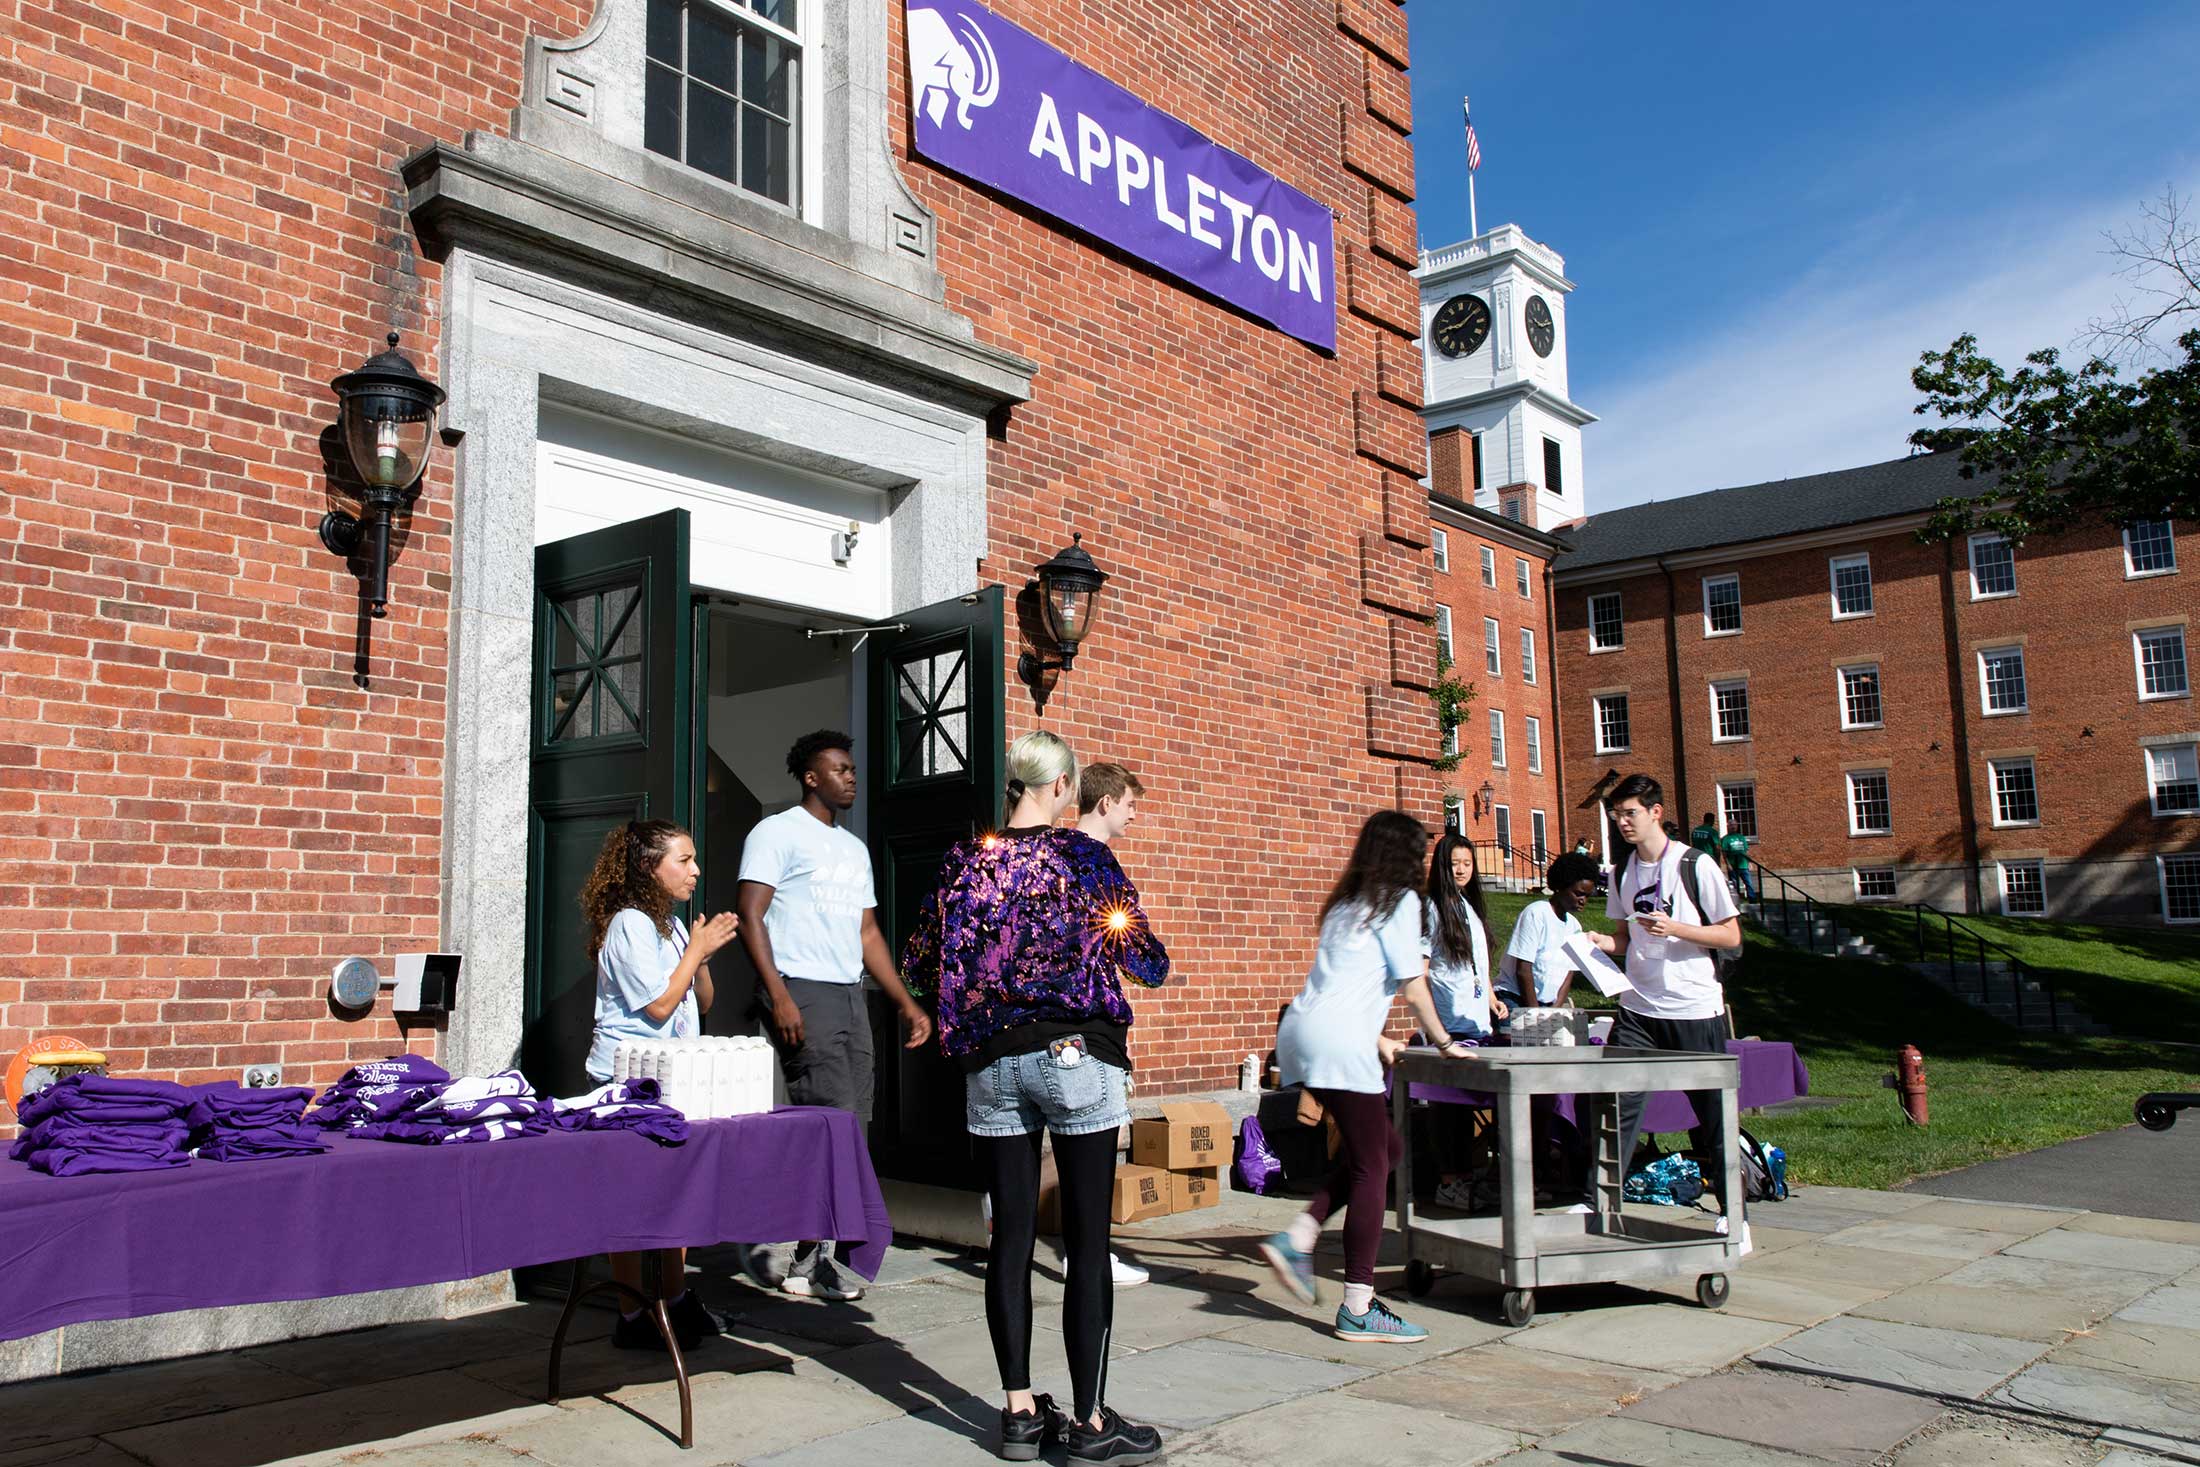 Amherst College staff greet new students arriving in front of Appleton Hall